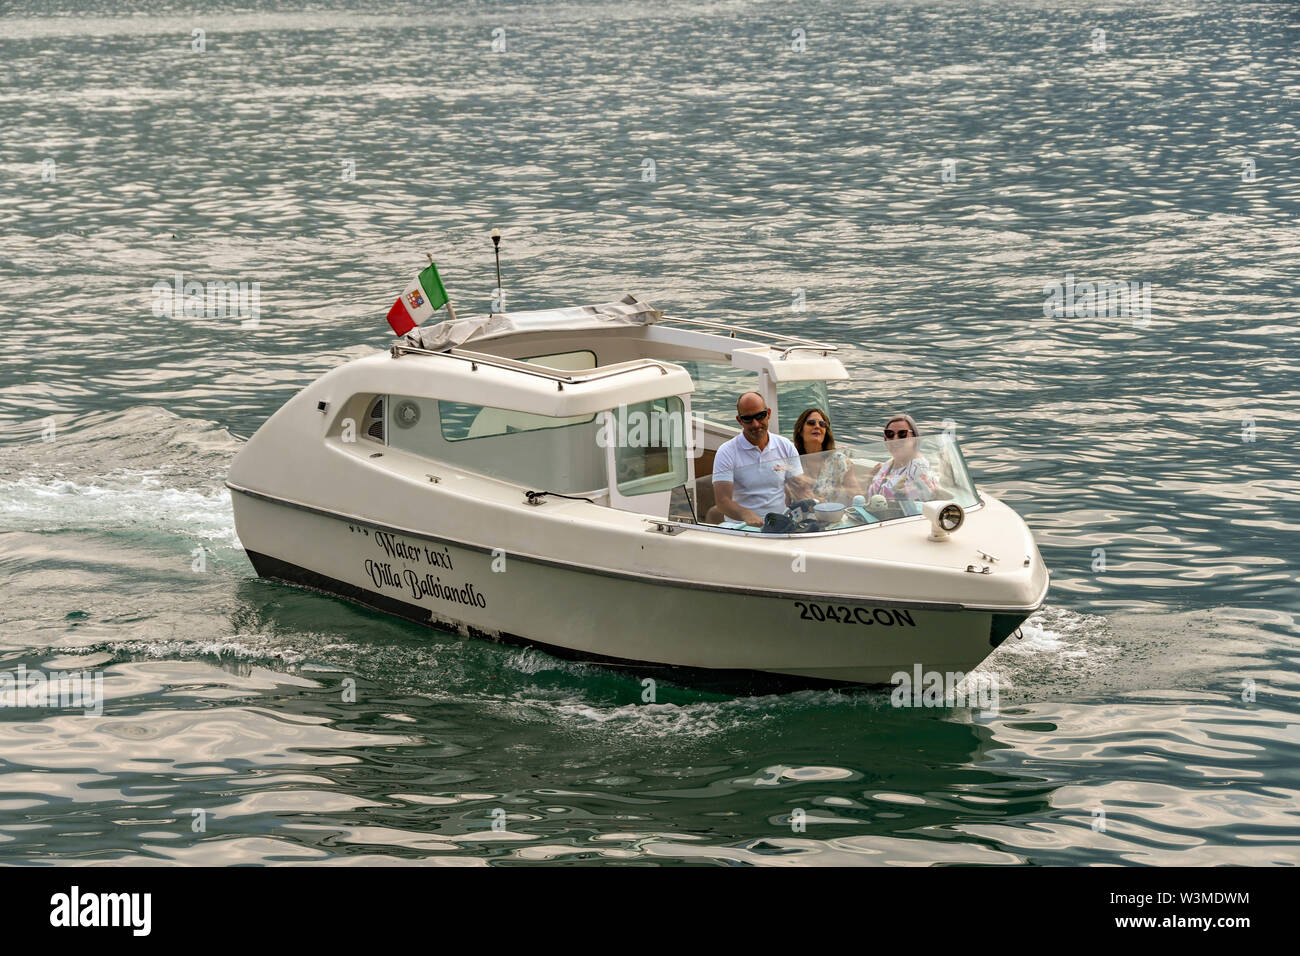 LAKE COMO, ITALY - JUNE 2019: Private water taxi bringing visitors to the landing stage of the Villa Balbianello in Lenno on Lake Como. Stock Photo